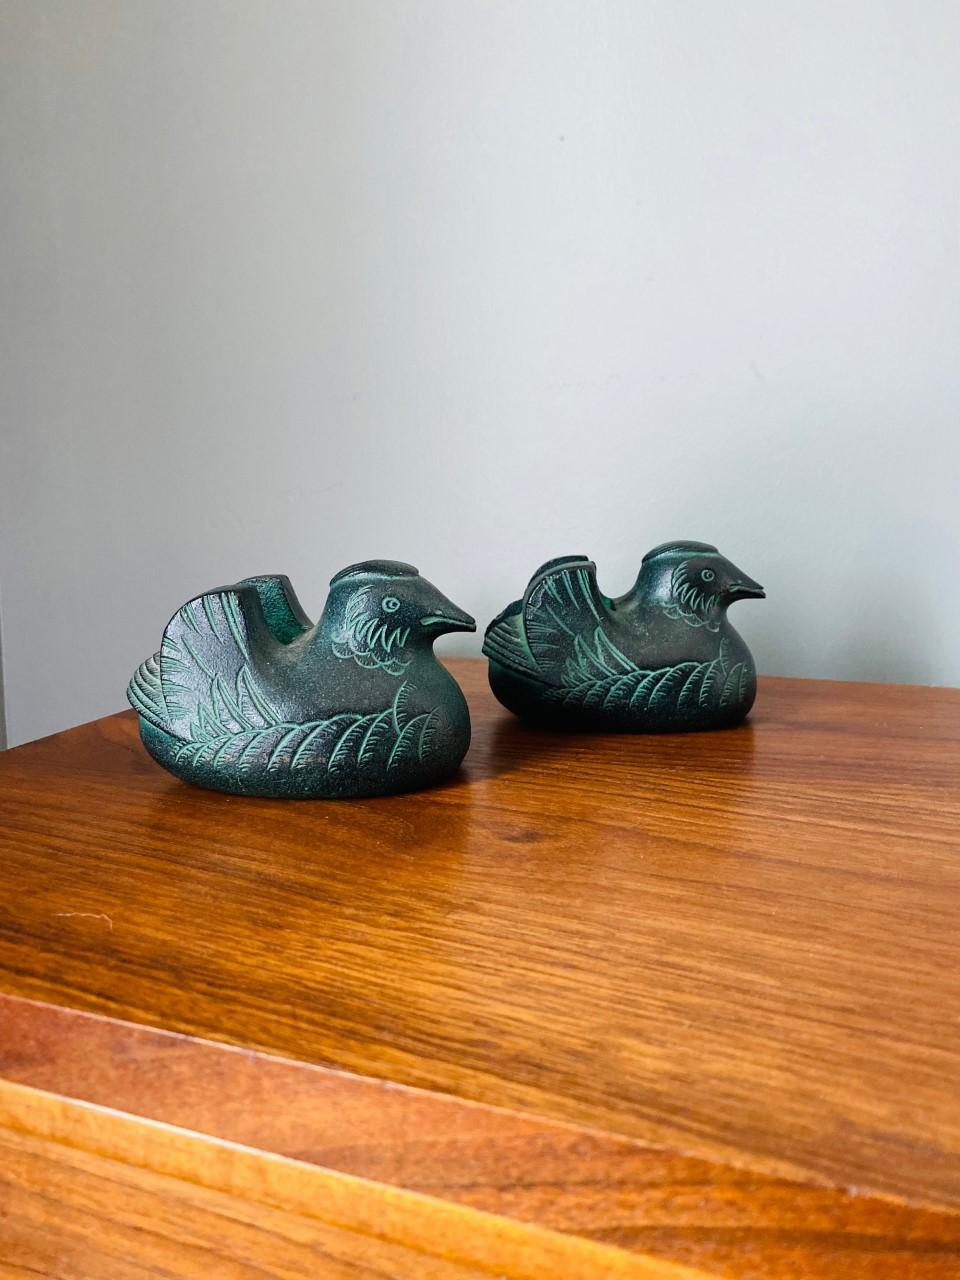 Incredible pair of Japanese hand cast bronze Mandarin Duck screen holders with detailed plumage, Taisho period 1920. Each of these two sculptures is in great condition with a beautiful patina finish. Beautiful works of art that serve as wonderful